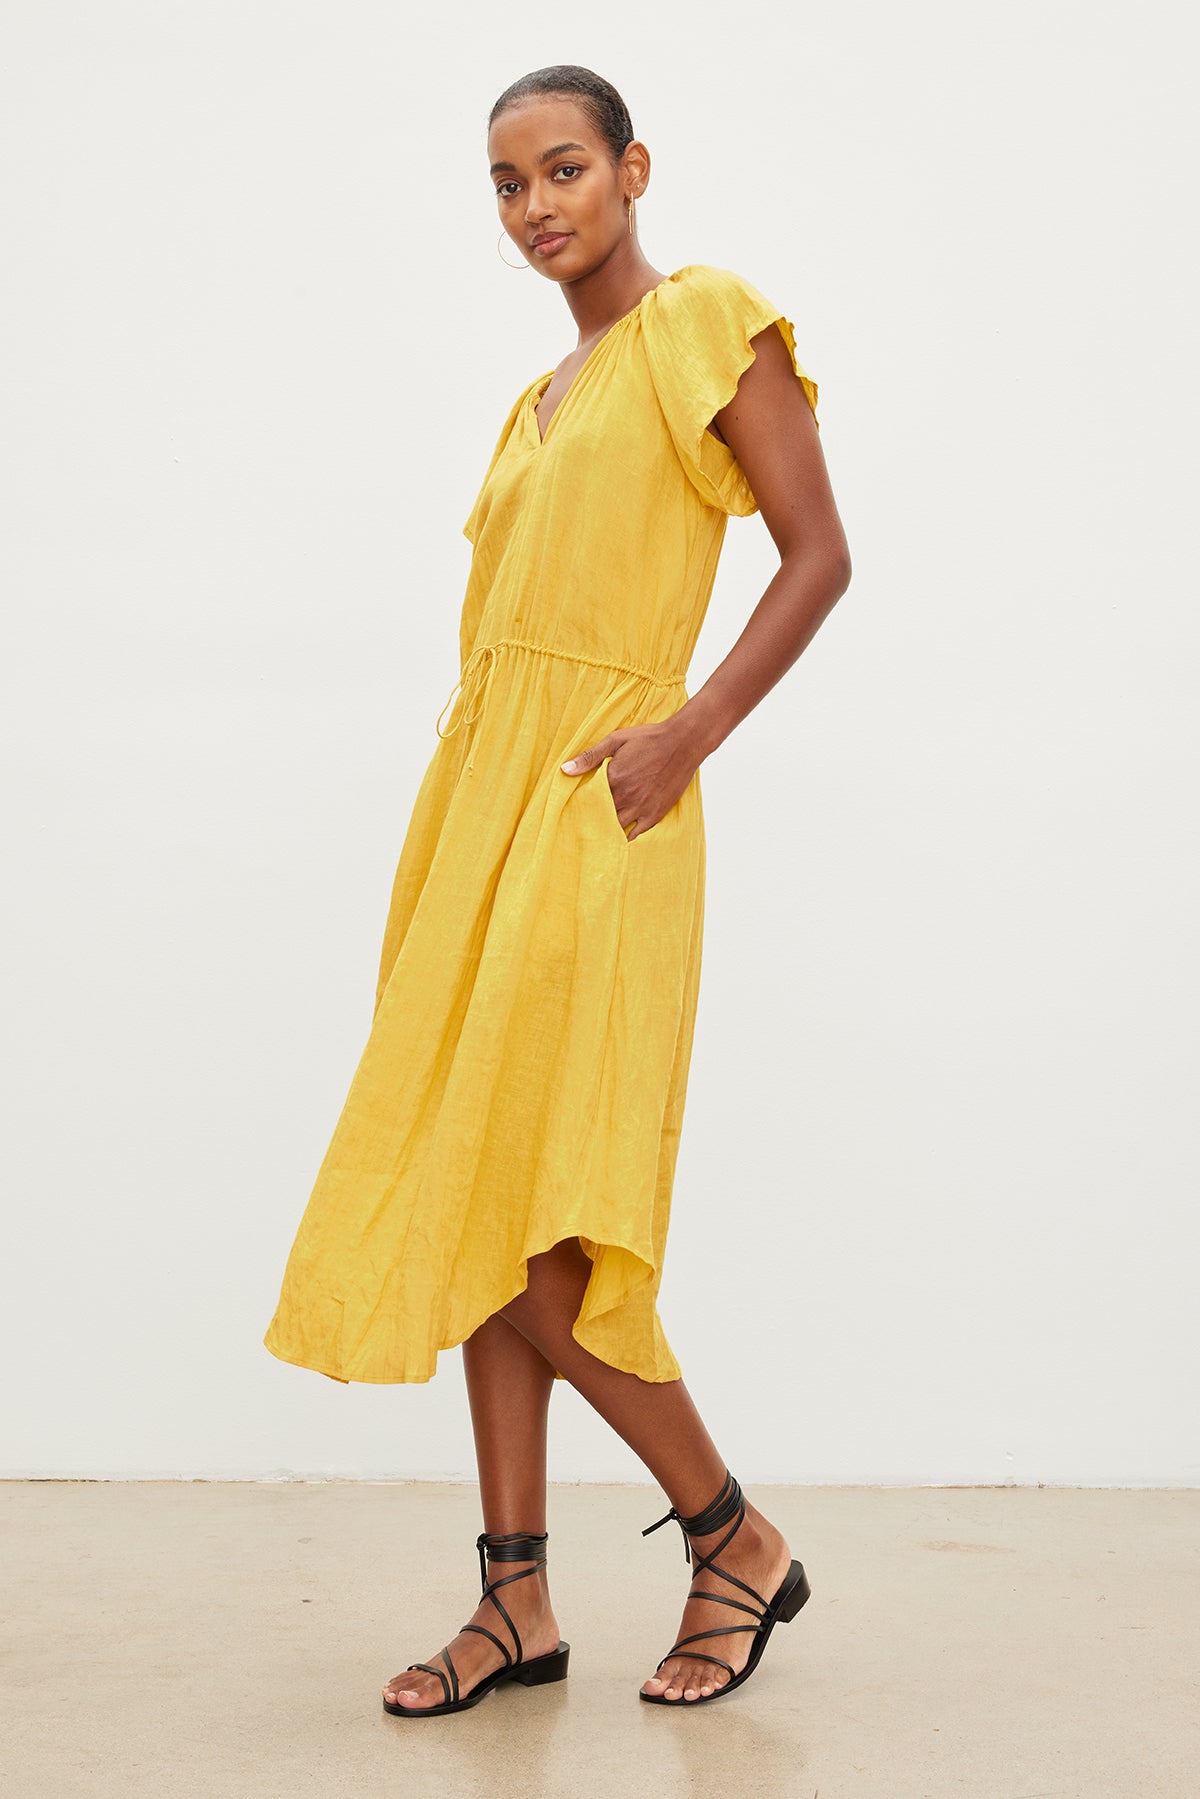   A woman in a yellow Velvet by Graham & Spencer PEPPER LINEN V-NECK DRESS with a drawstring waist and black sandals stands confidently, her hands placed slightly on her hips, posing against a white background. 